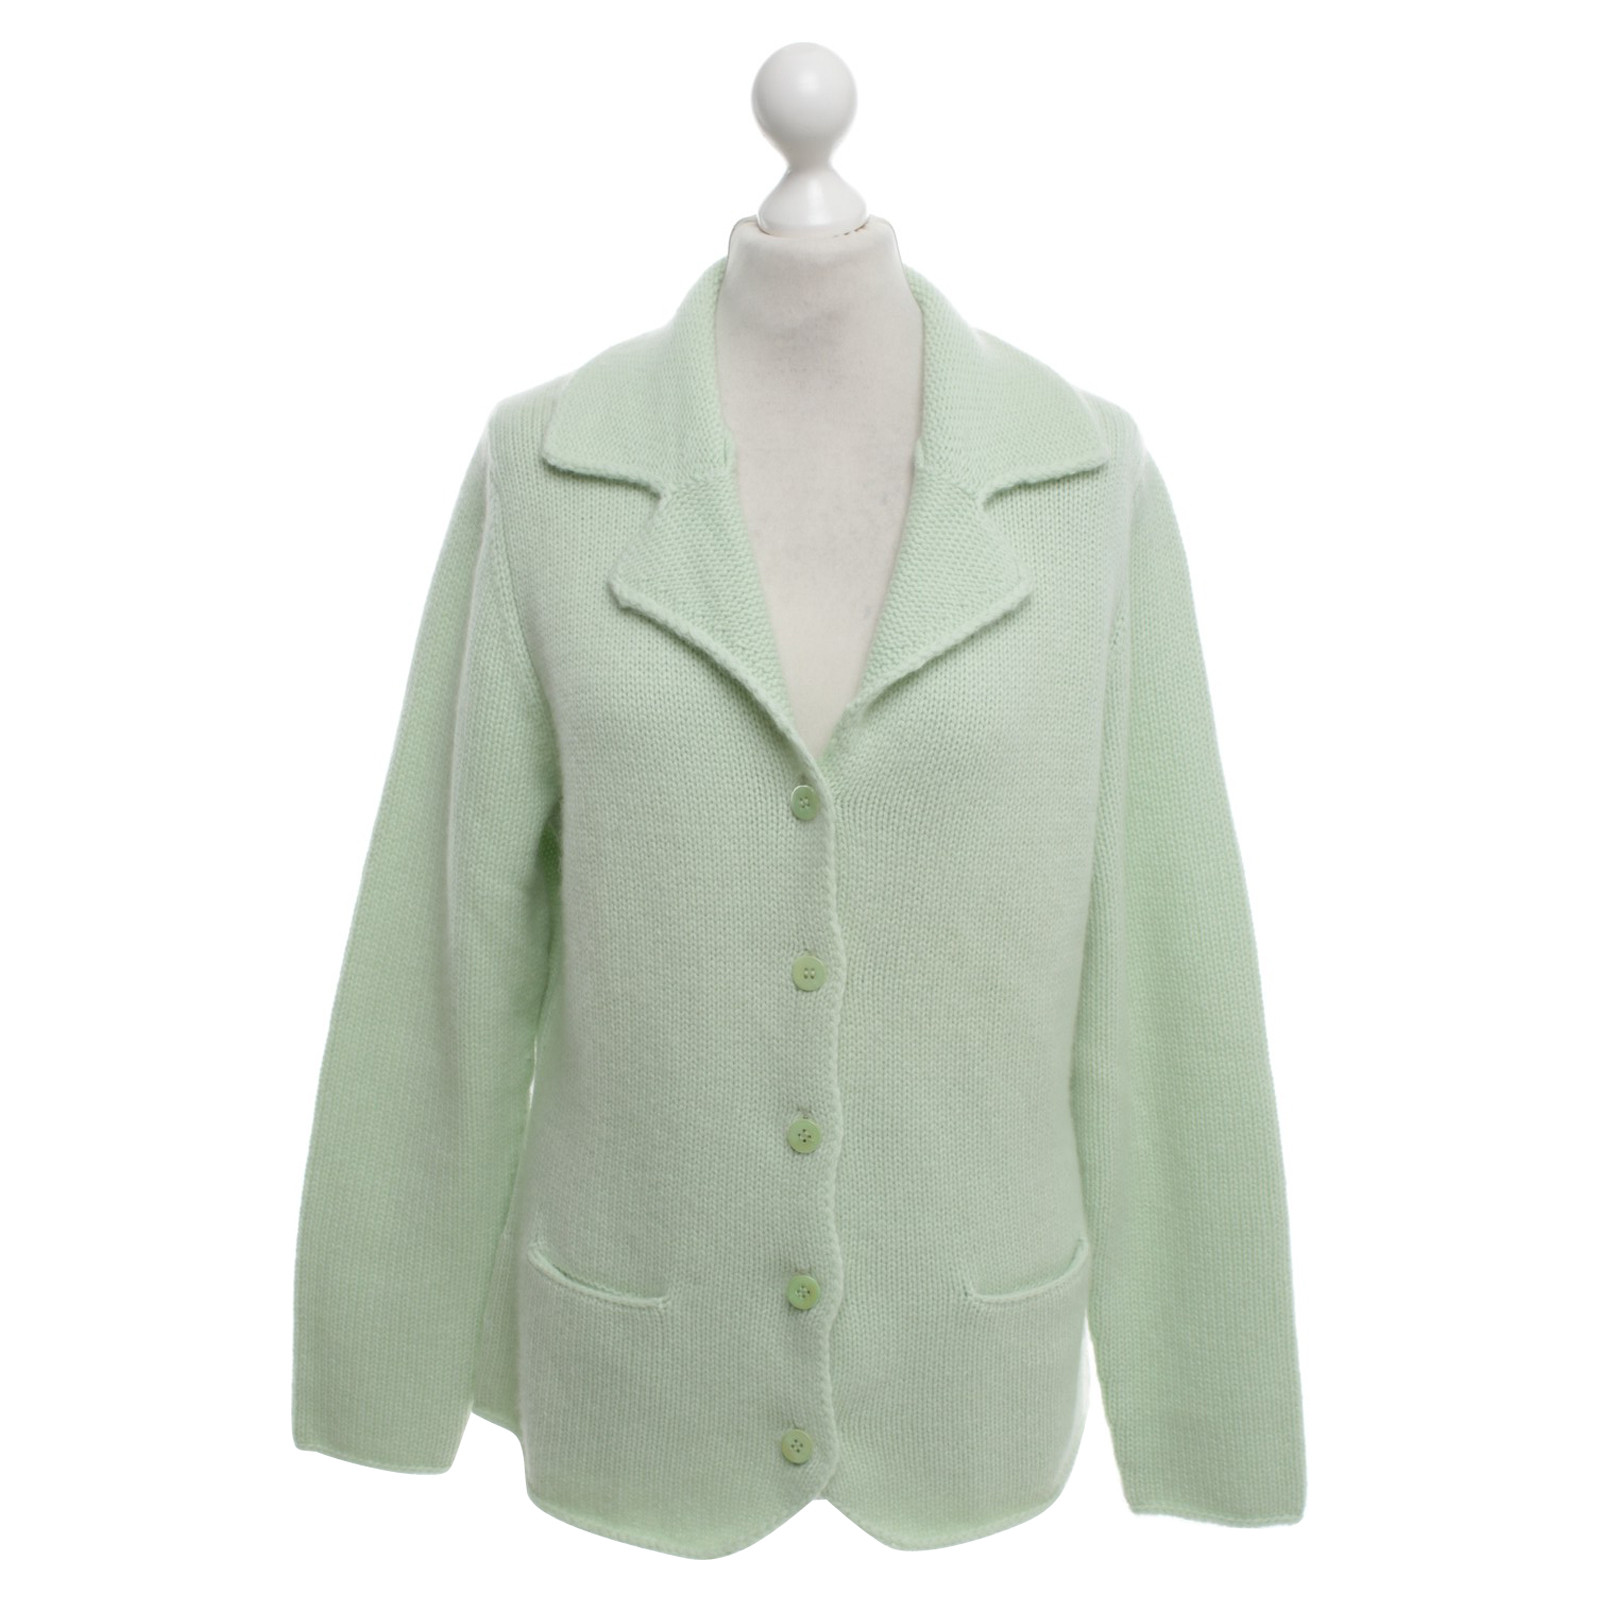 Allude Cashmere Cardigan In Mint Green Second Hand Allude Cashmere Cardigan In Mint Green Buy Used For 0